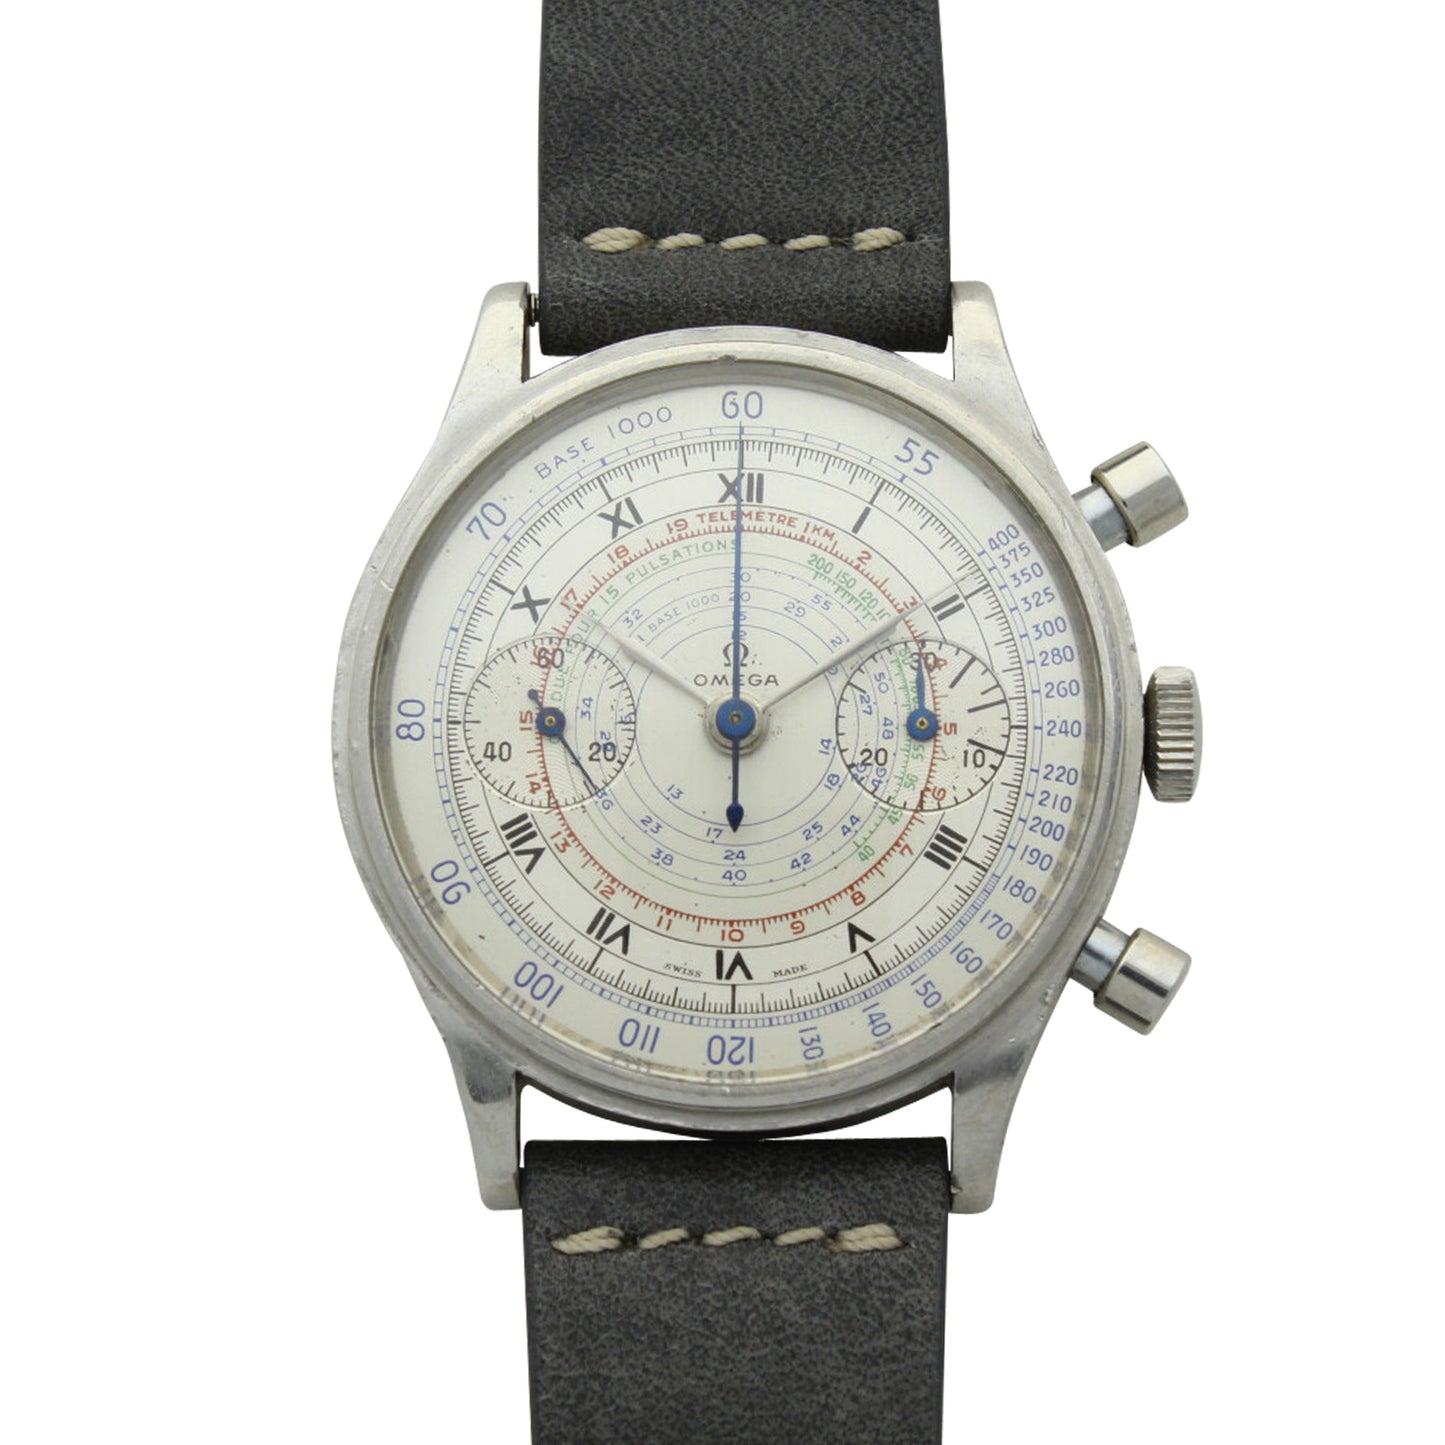 Stainless steel chronograph wristwatch. Made 1948